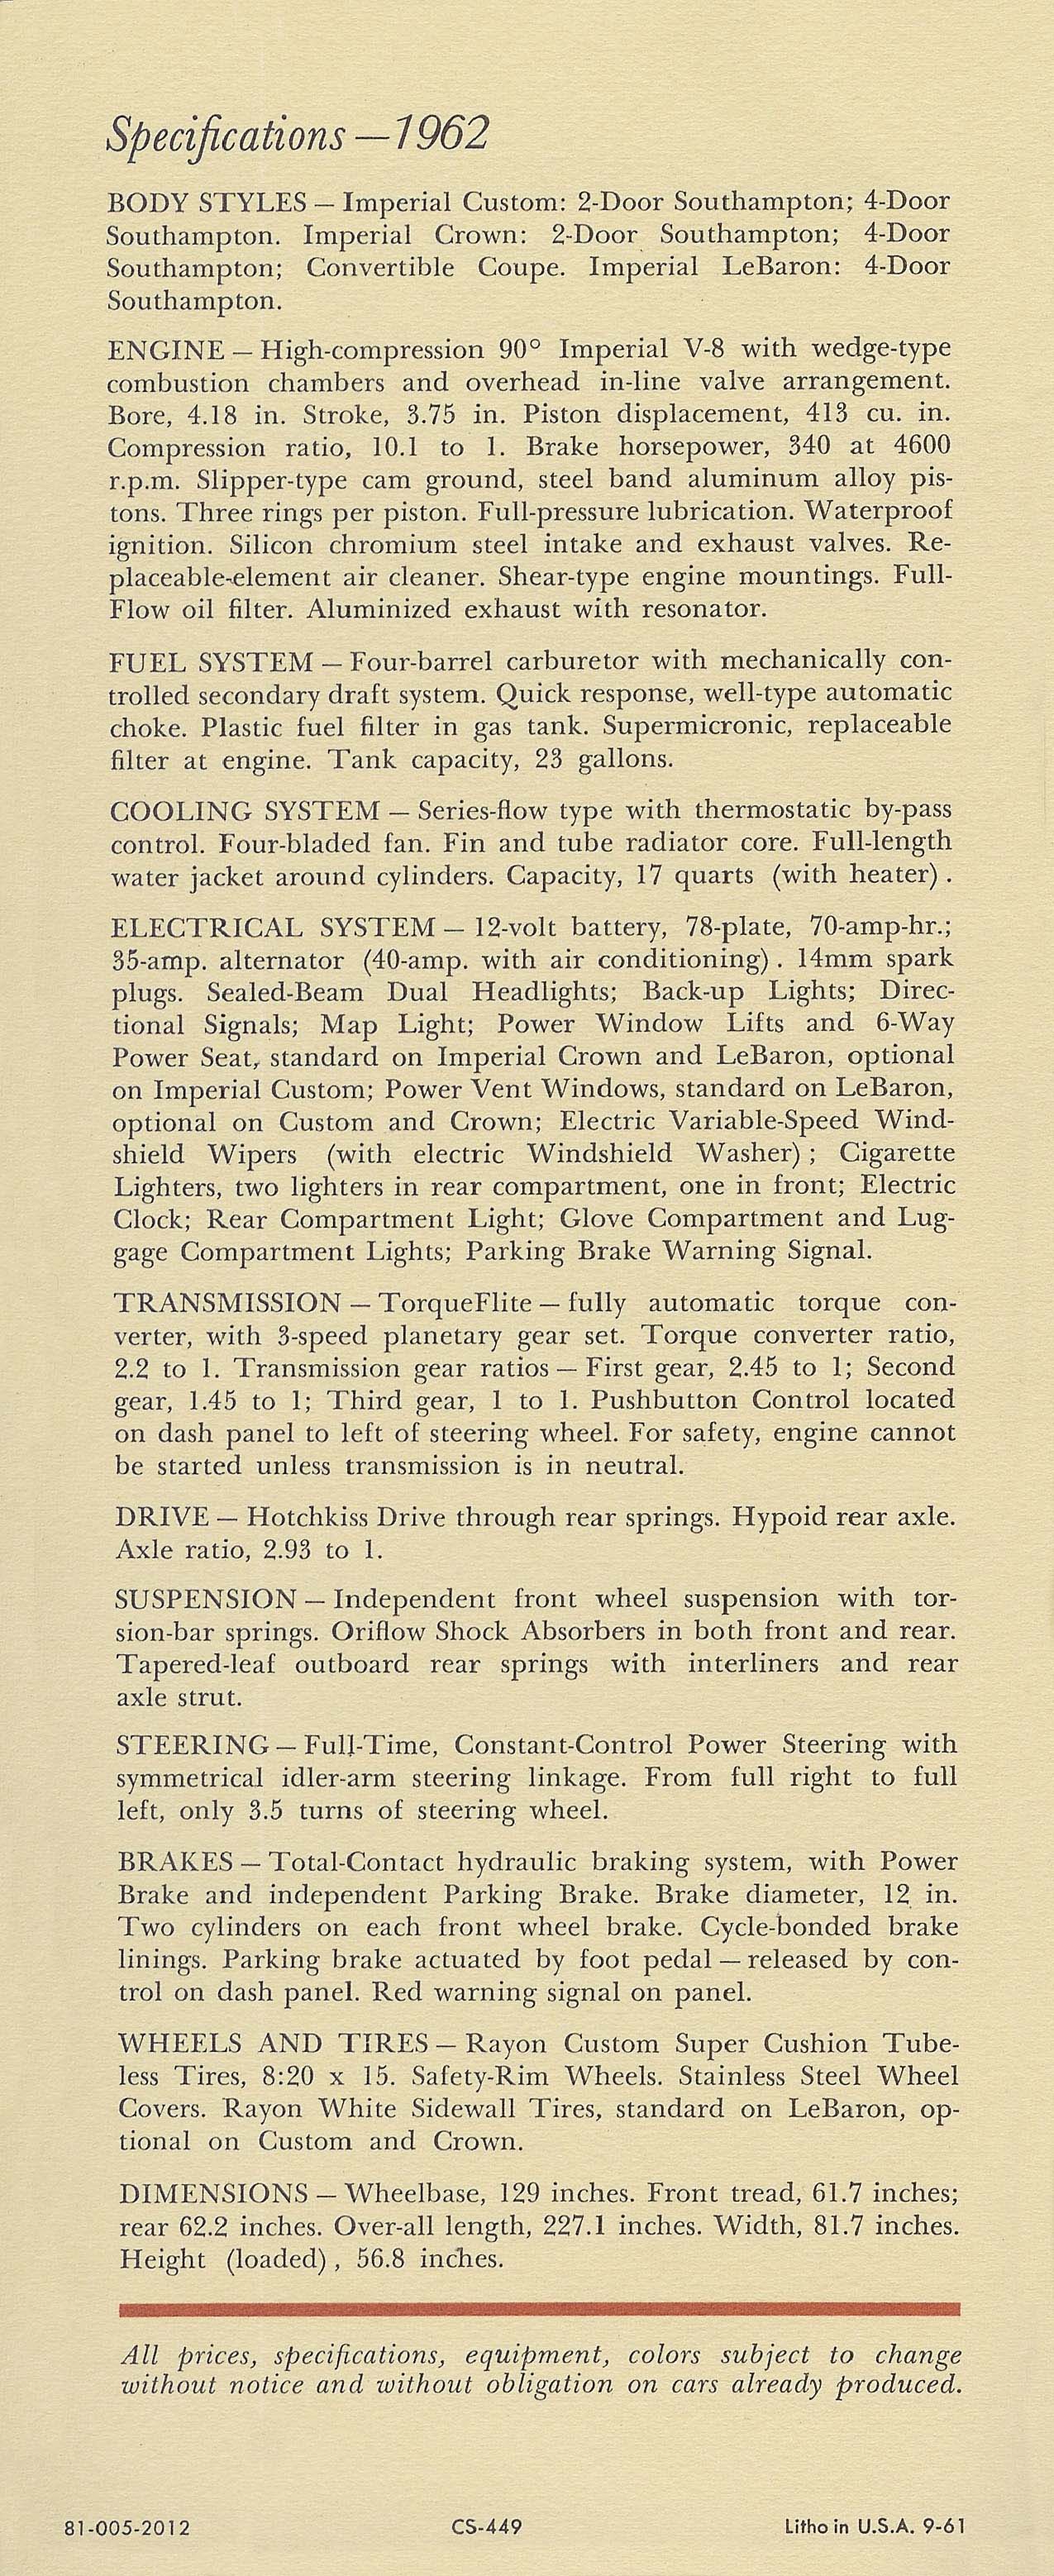 1962 Chrysler Imperial Guide Page 5